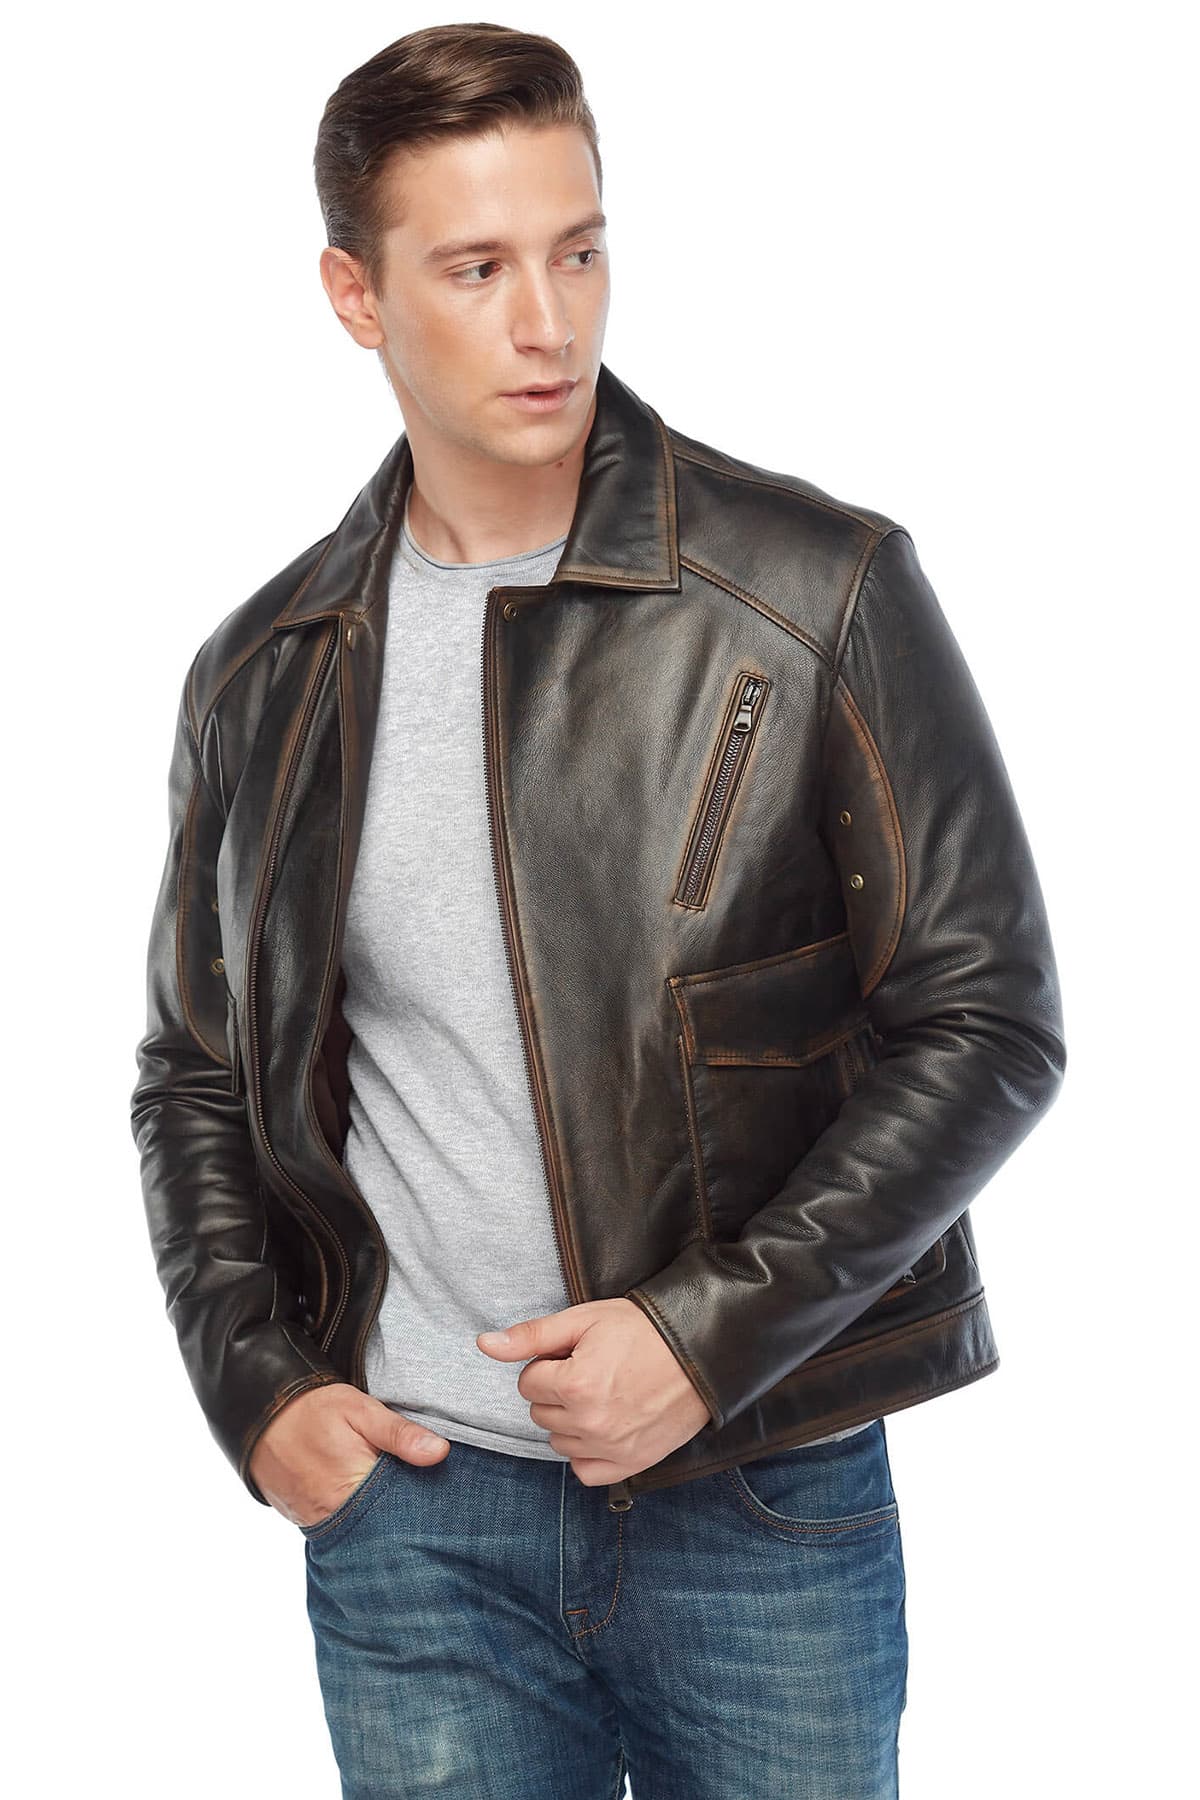 You've Searched for Mens Genuine Distressed Leather Jacket